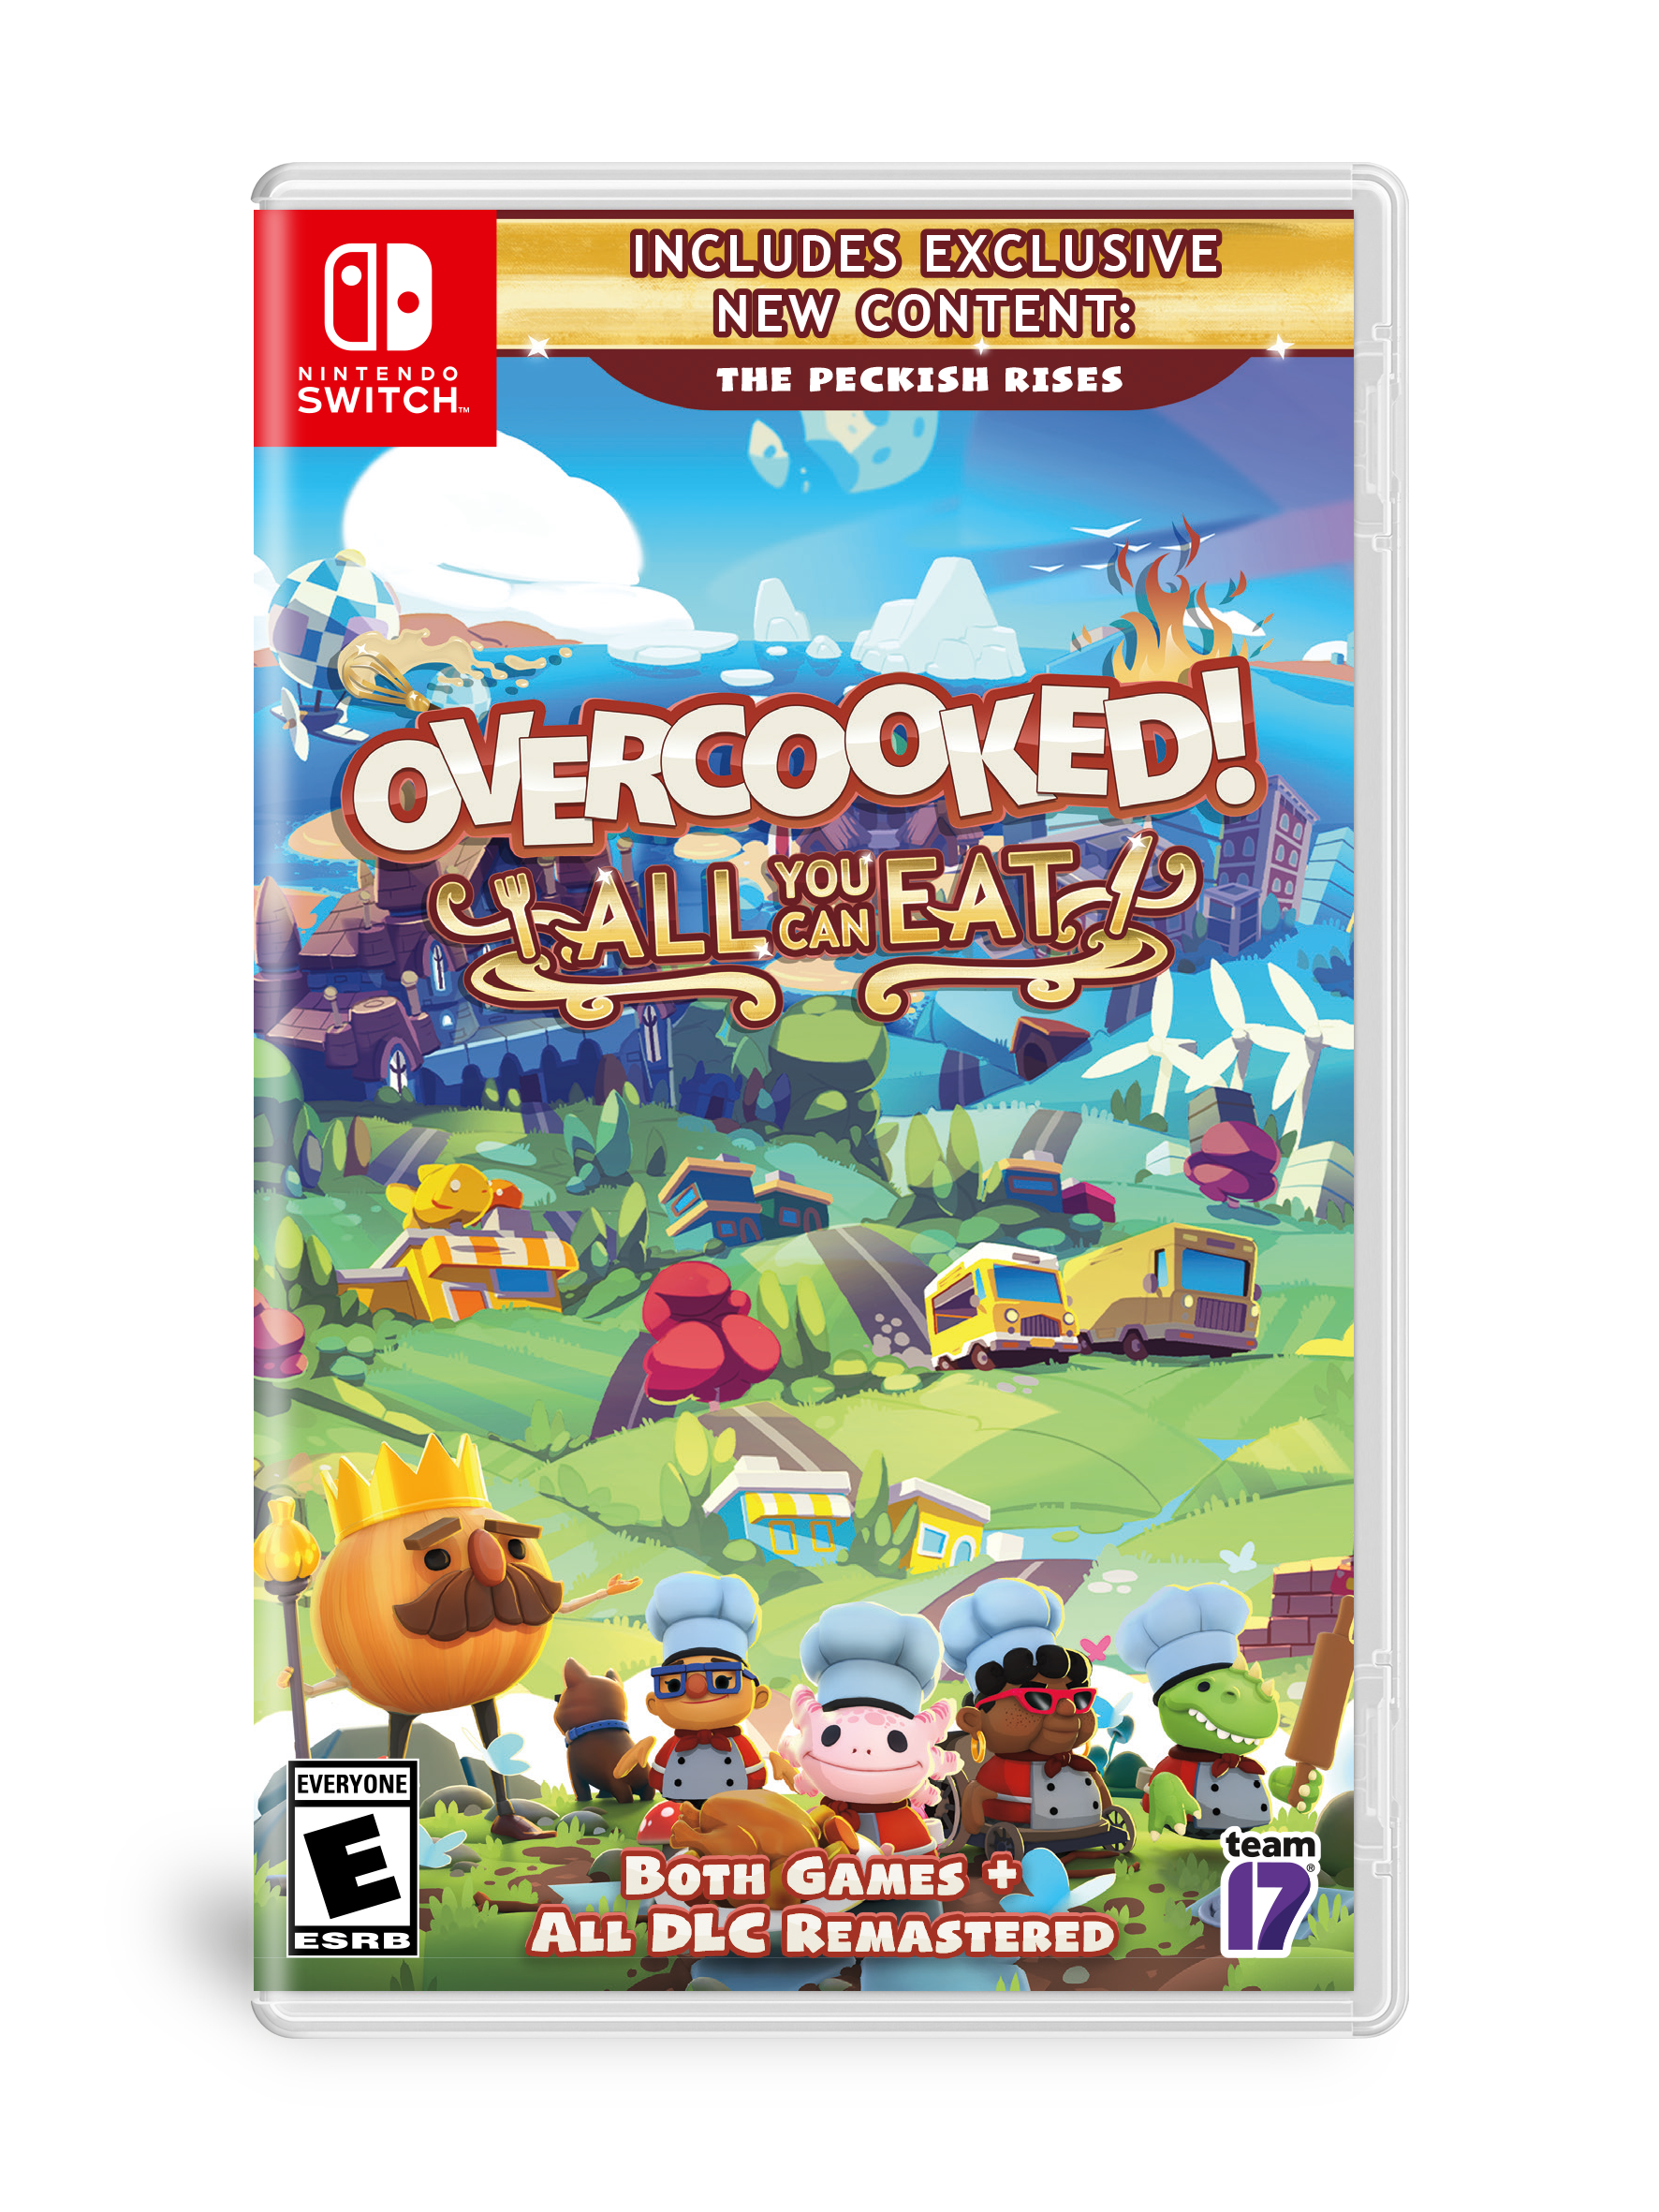 Nintendo Switch Lite Turquoise with Overcooked! All You Can Eat and Mytrix Accessories NS Game Disc Bundle Best Holiday Gift